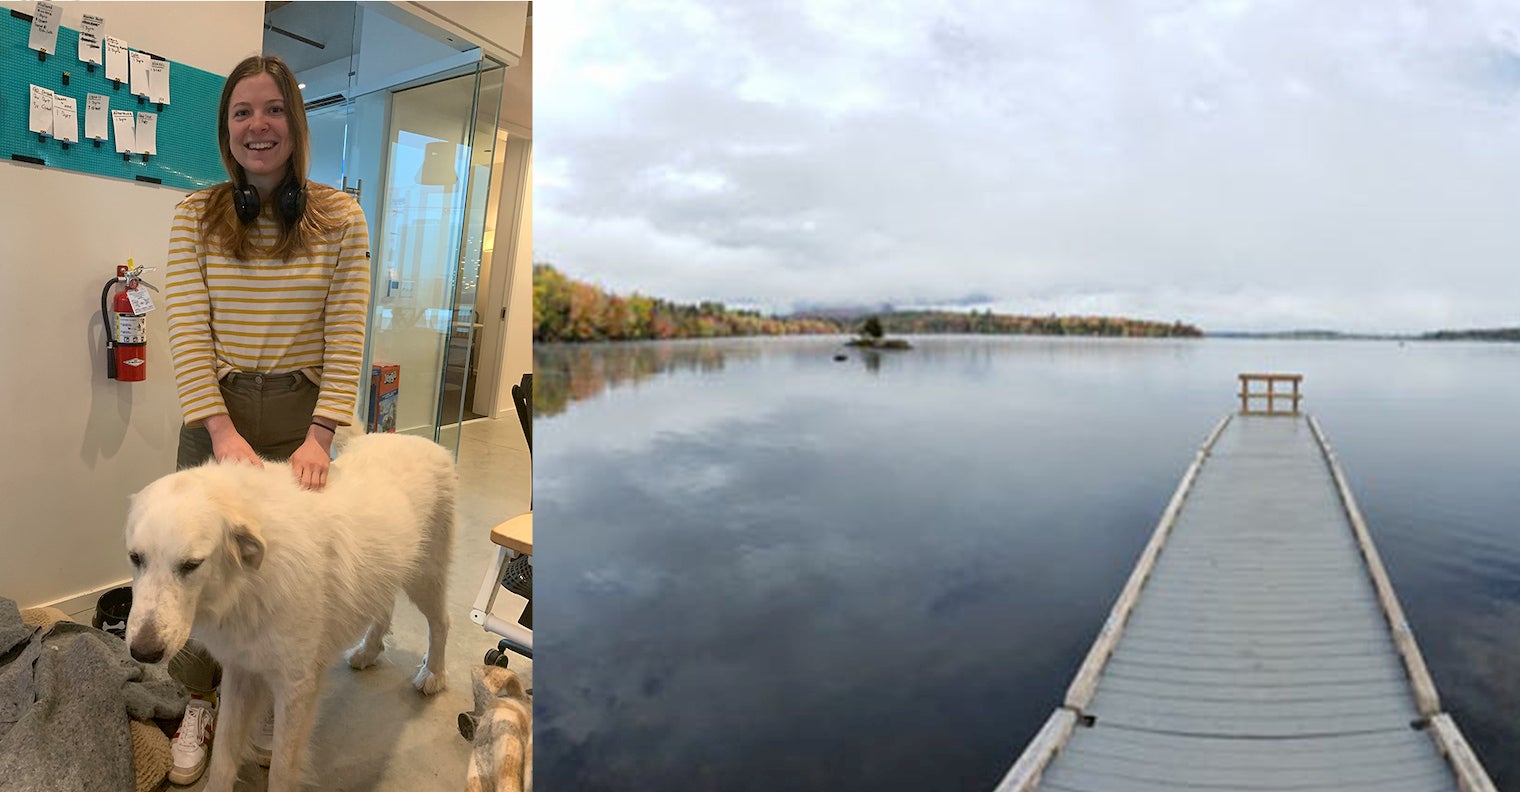 Left image of girl with headphones and a large dog in the office, Right image a panorama of a dock floating in an expansive lake surrounded by a forest.